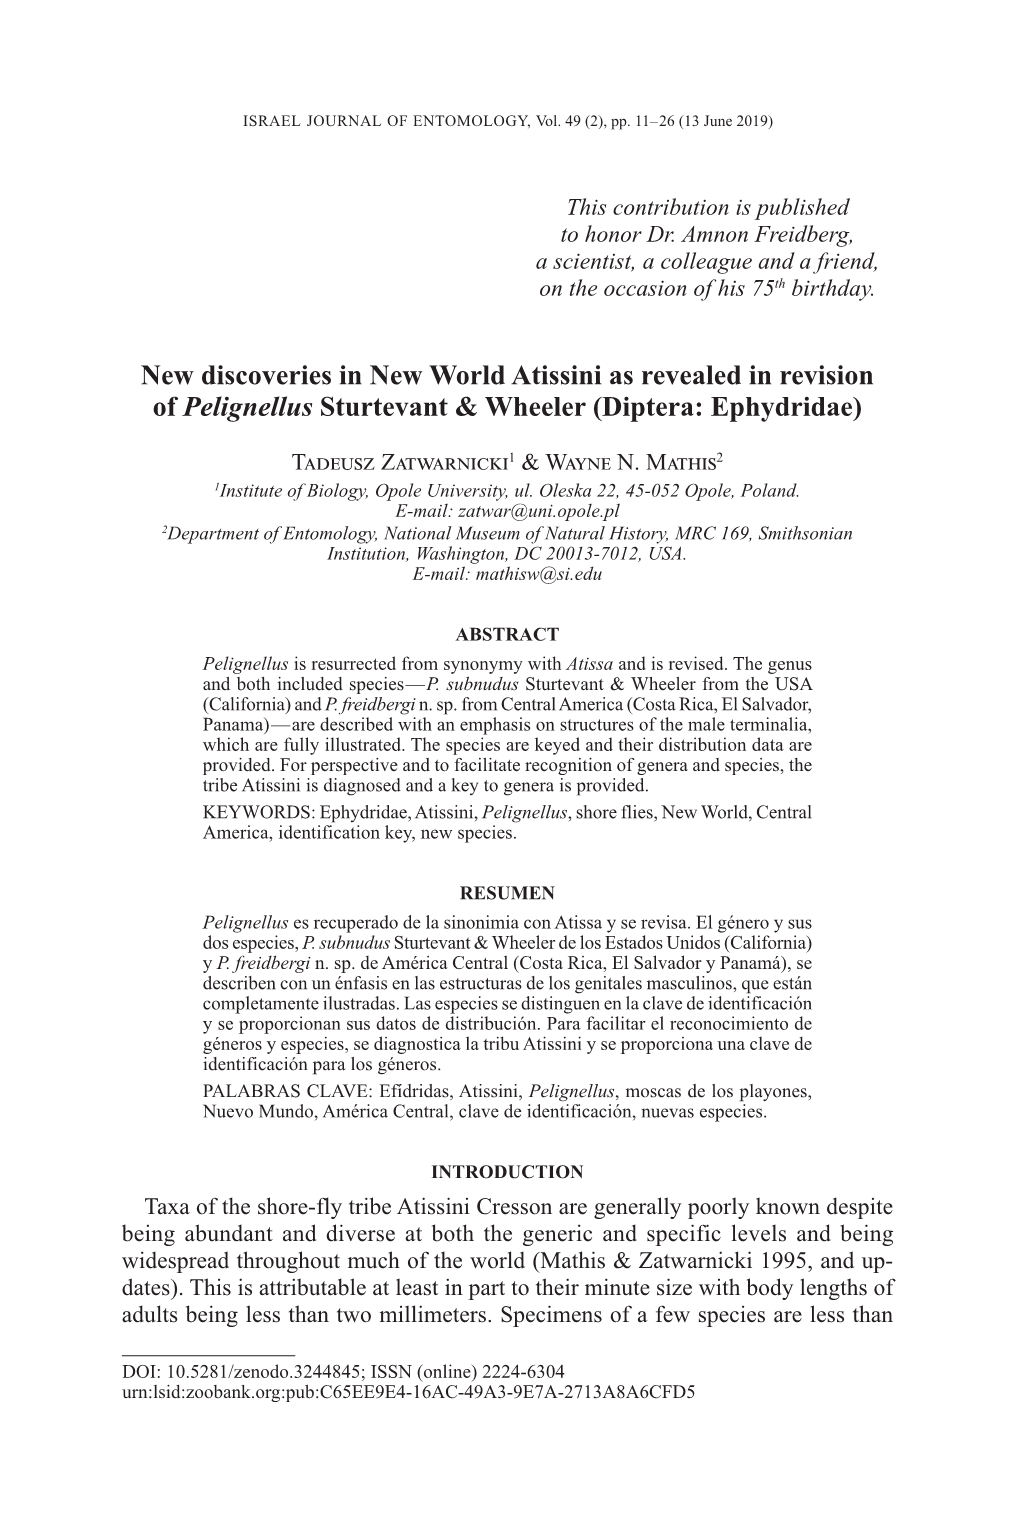 New Discoveries in New World Atissini (Diptera: Ephydridae)